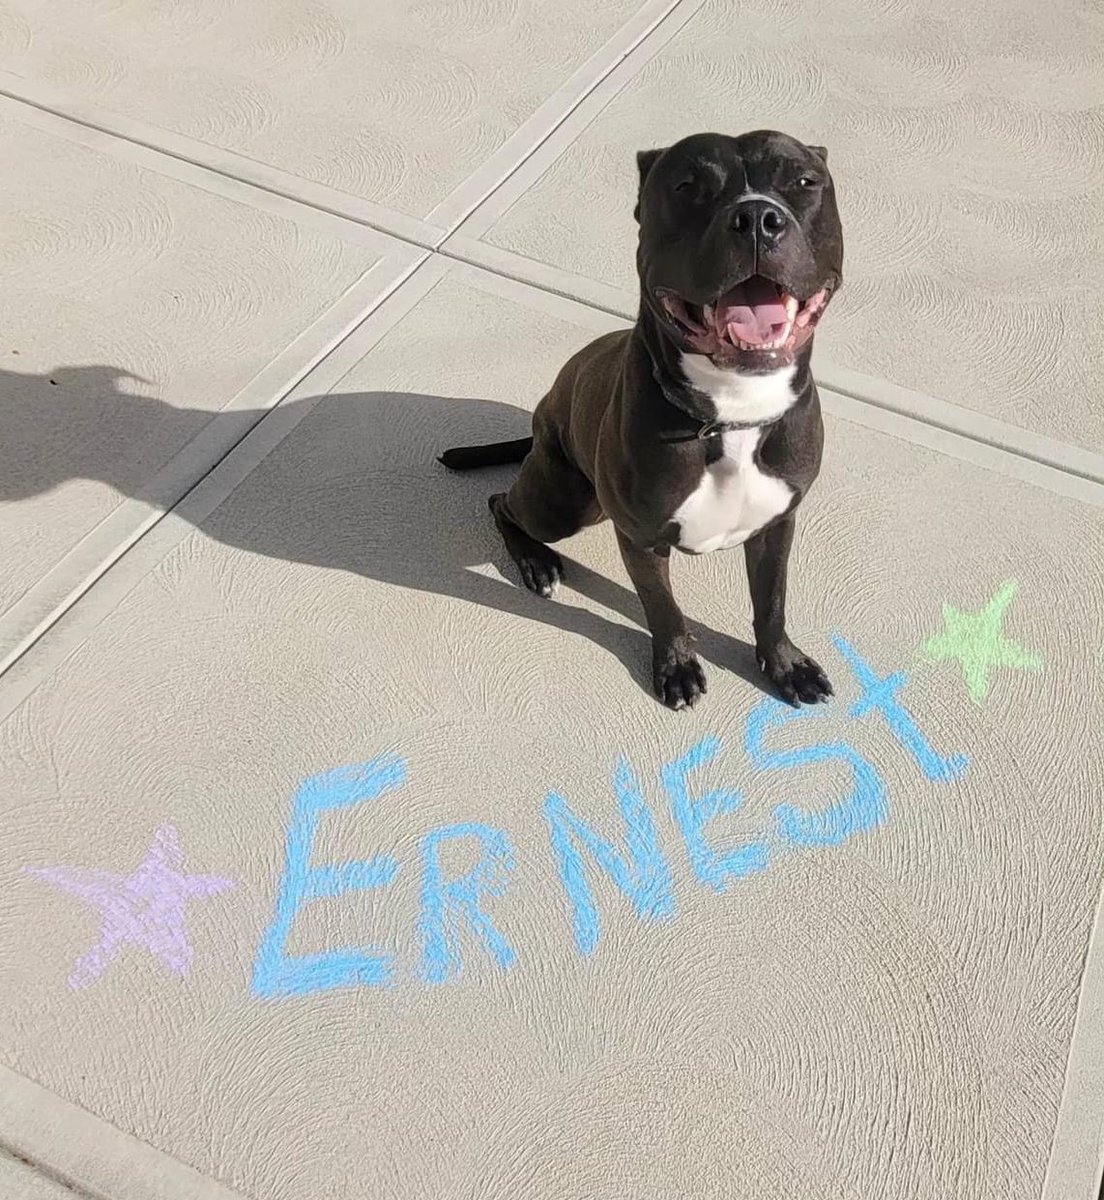 Hello! My name is Ernest...I spelled it out so you can ask for a meet with me! tinyurl.com/meetacitydog Ernest is enjoying a break with a volunteer. So far, we’ve learned he: 🎾Loves toys & playing in the yard 🥰Likes to snuggle 🚗Enjoys car rides 🧻Housebroken 🐶Listens well